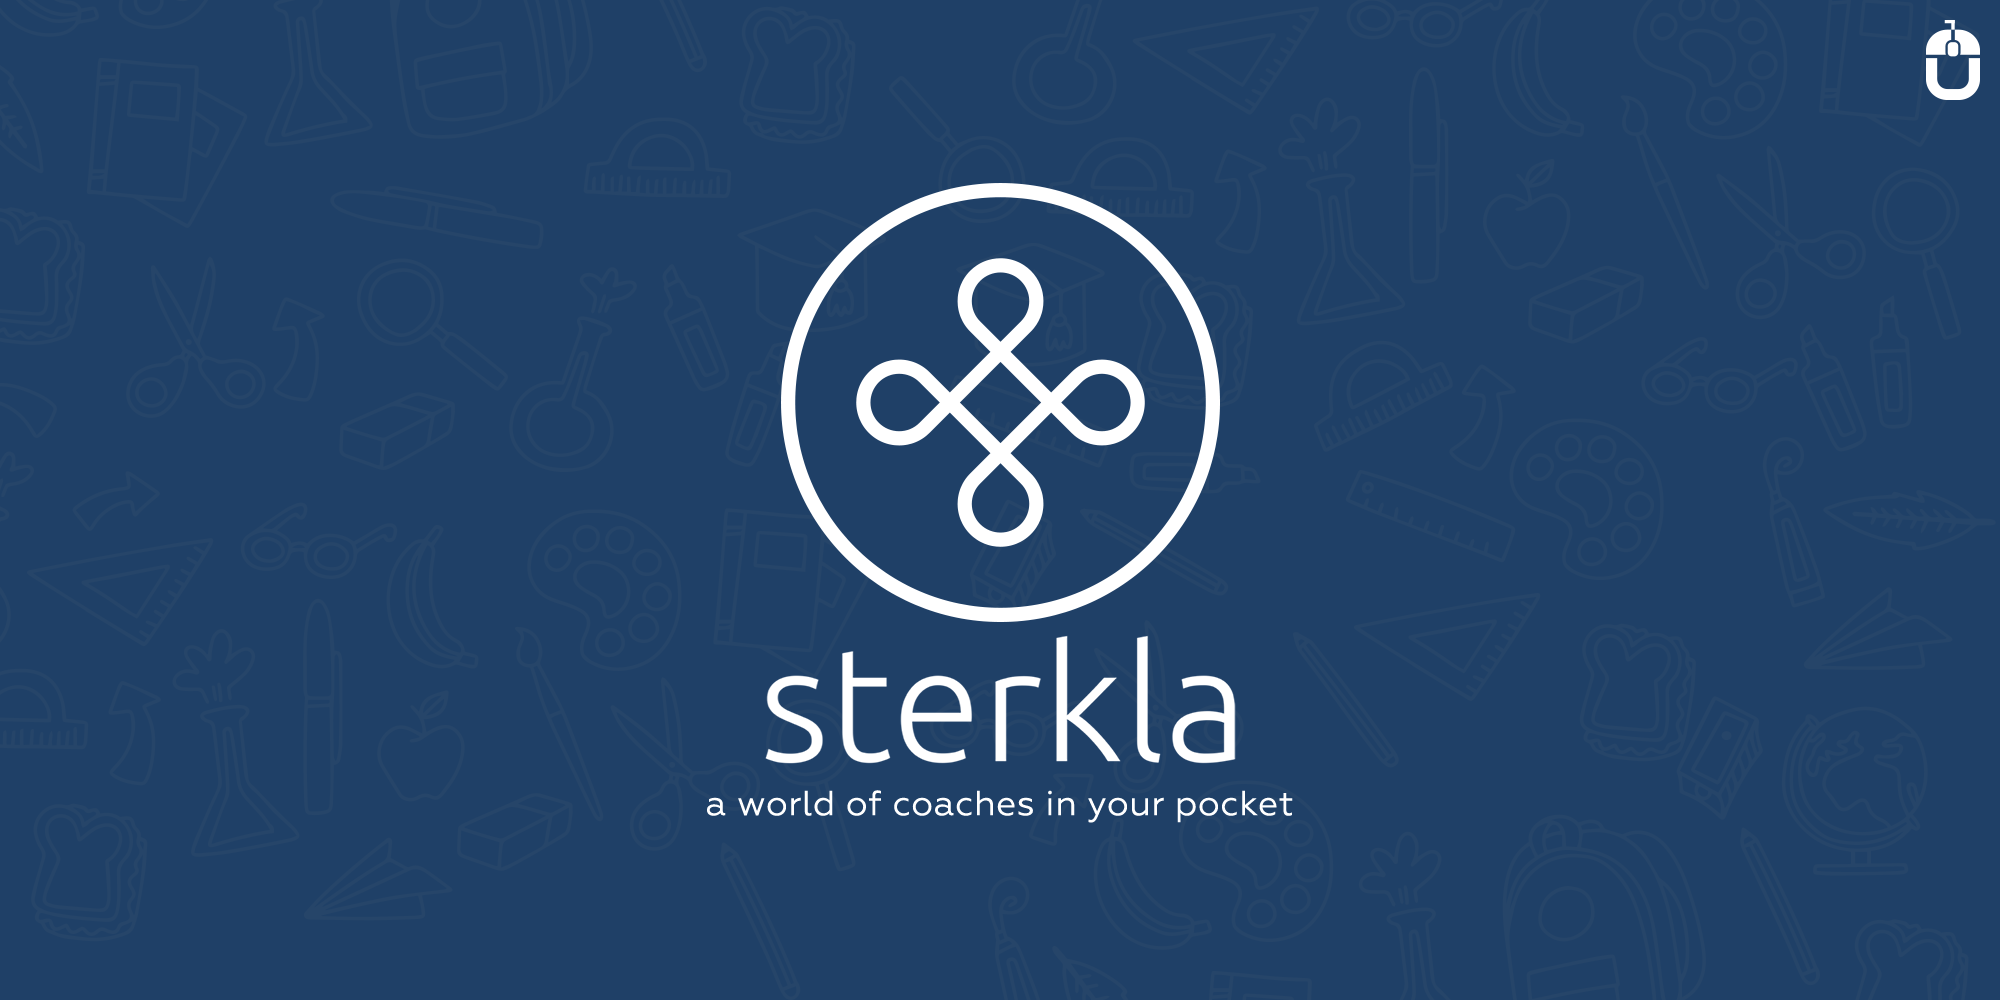 Sterkla – A world of coaches in your pocket